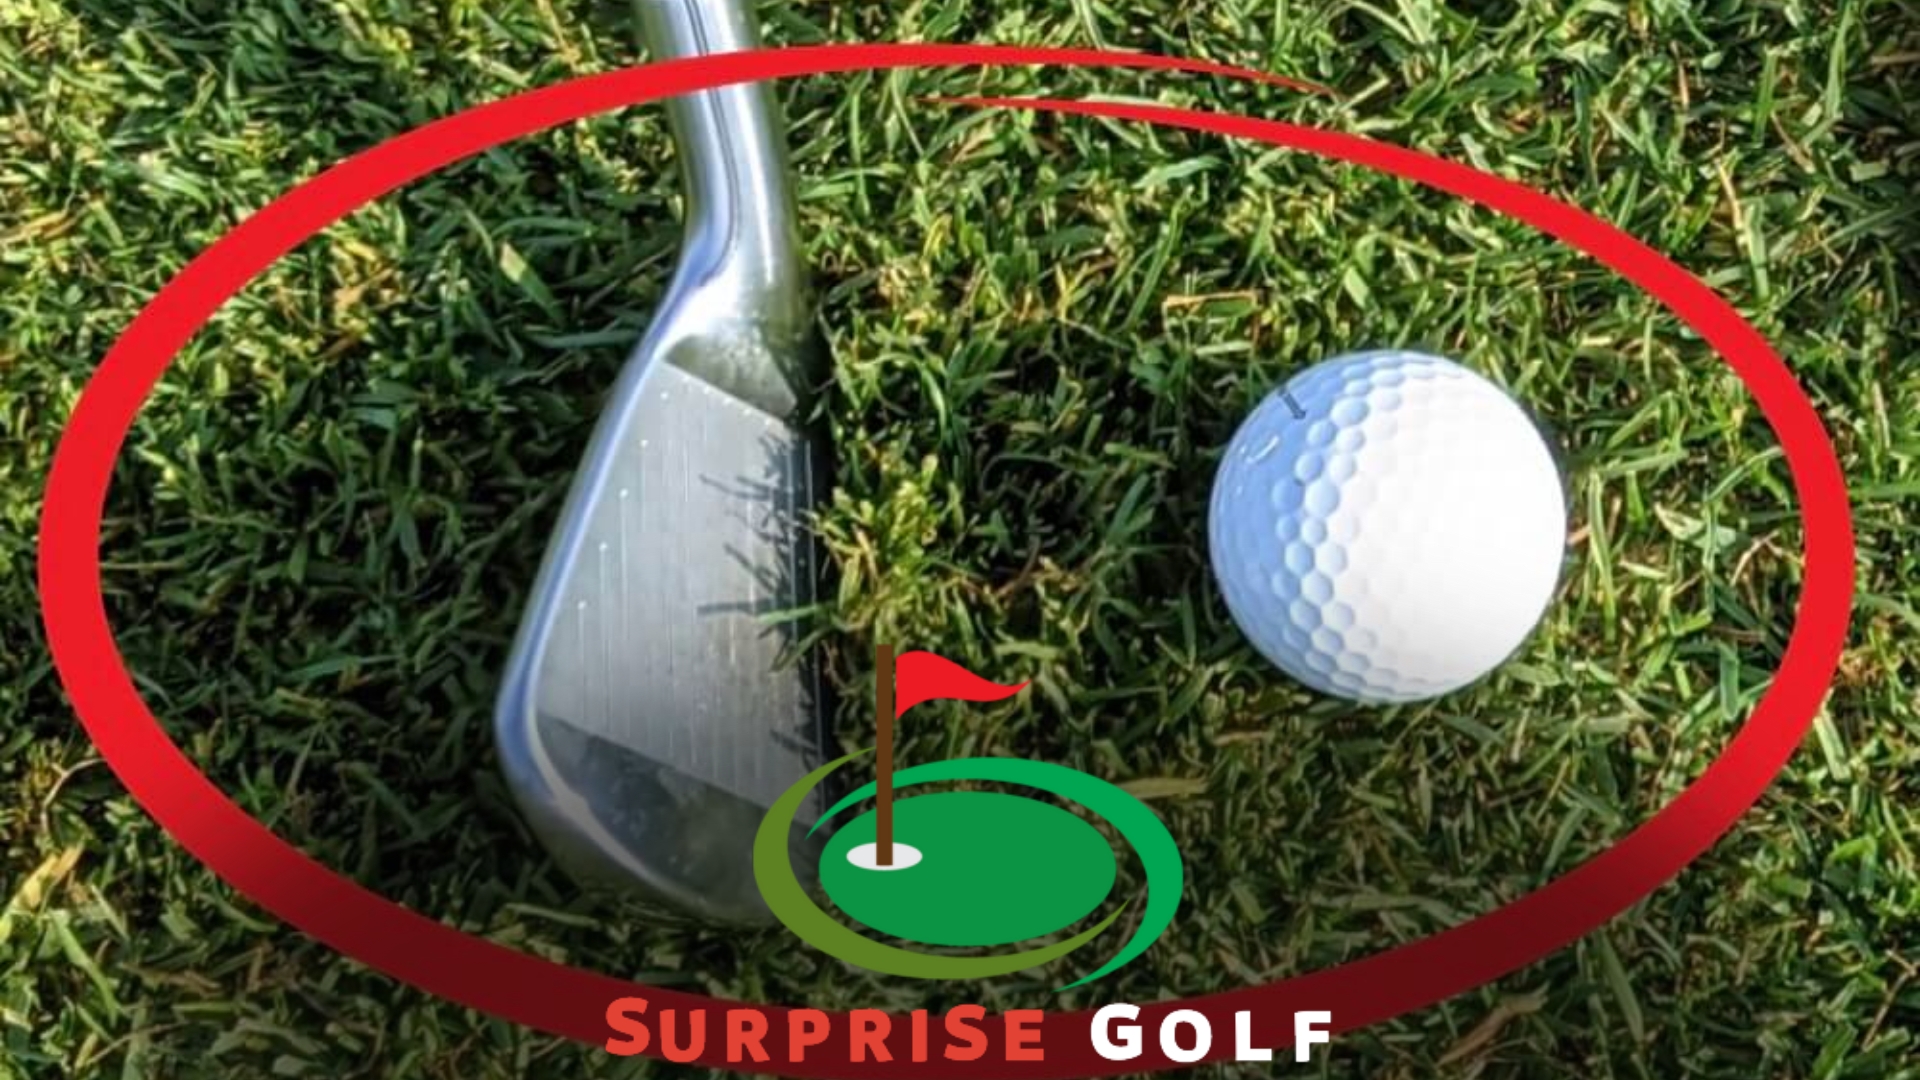 How to Stop Hitting behind the Golf Ball With Irons